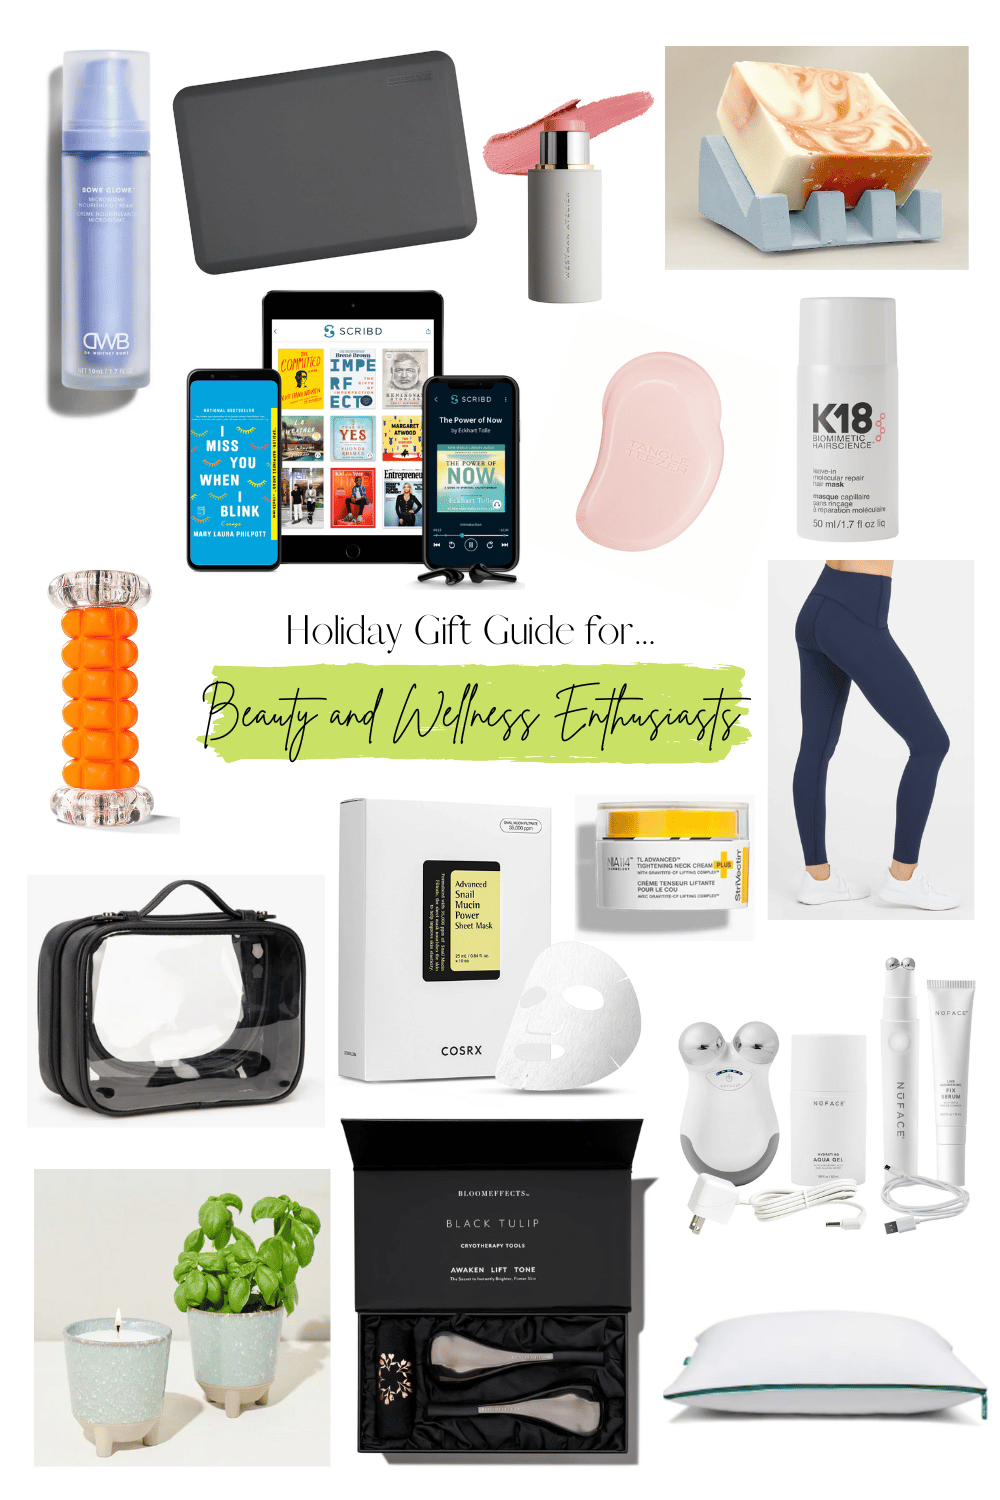 2023 Holiday Gift Guide For Home Cooks and Food Lovers - Domesticate ME